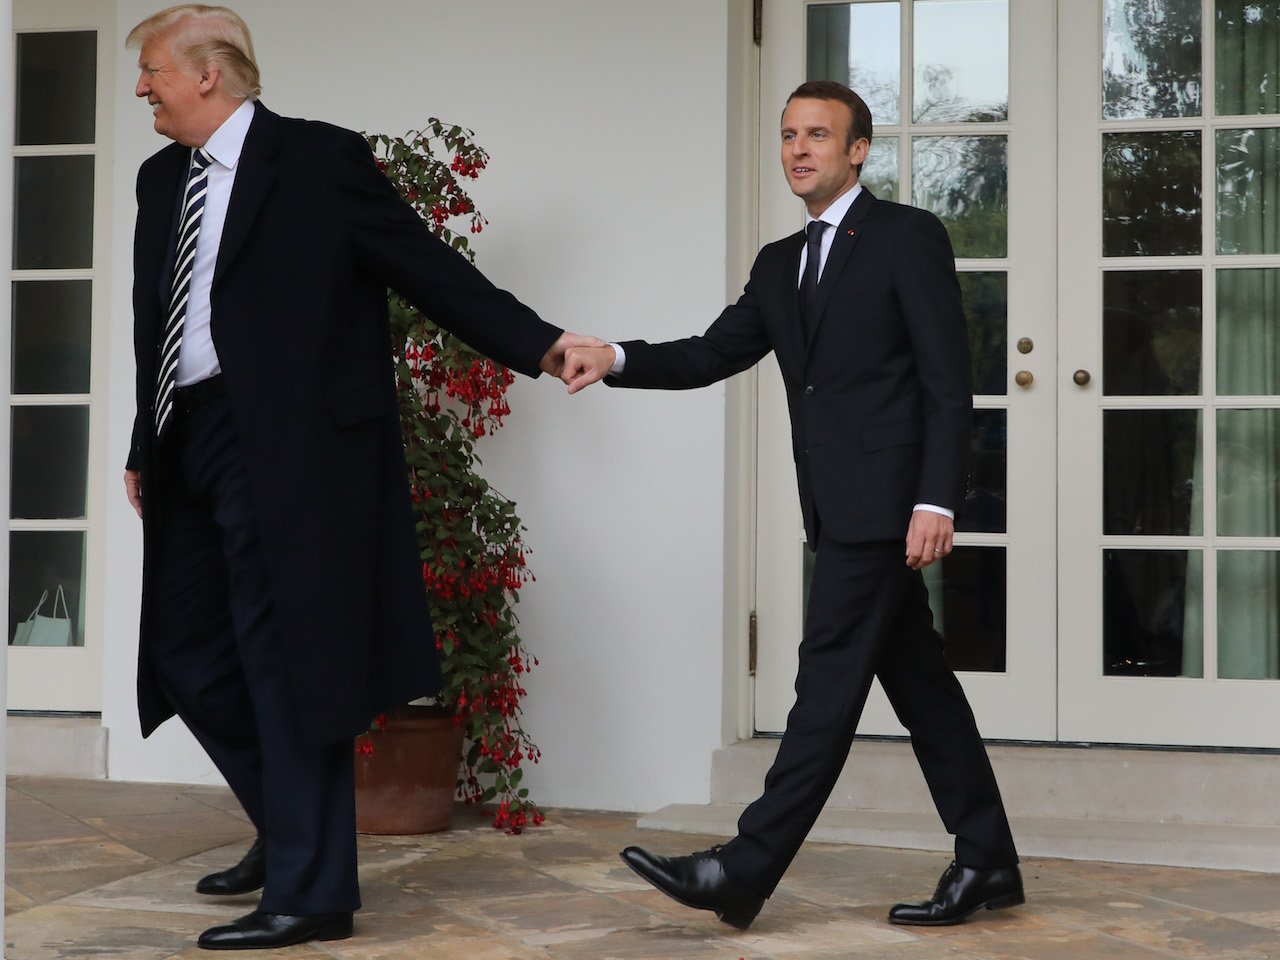 President Donald Trump and French President Emmanuel Macron holding hands